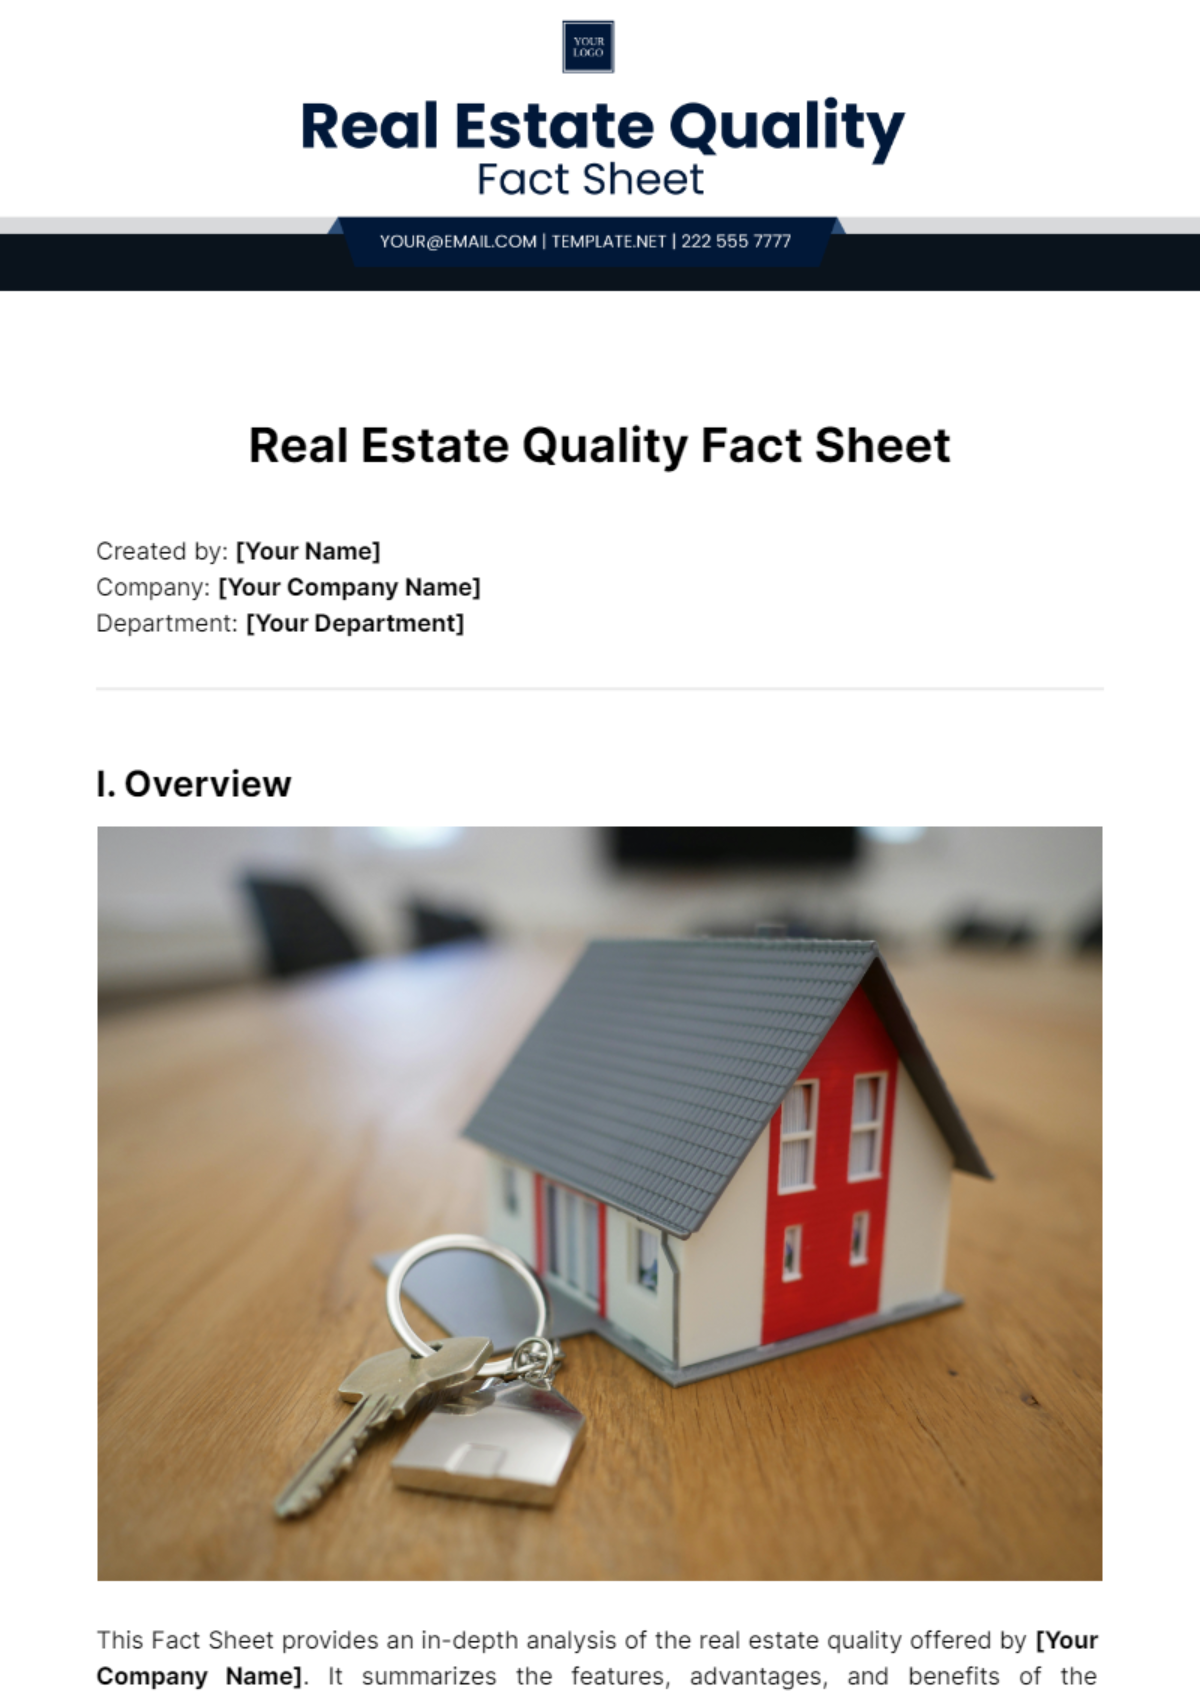 Real Estate Quality Fact Sheet Template